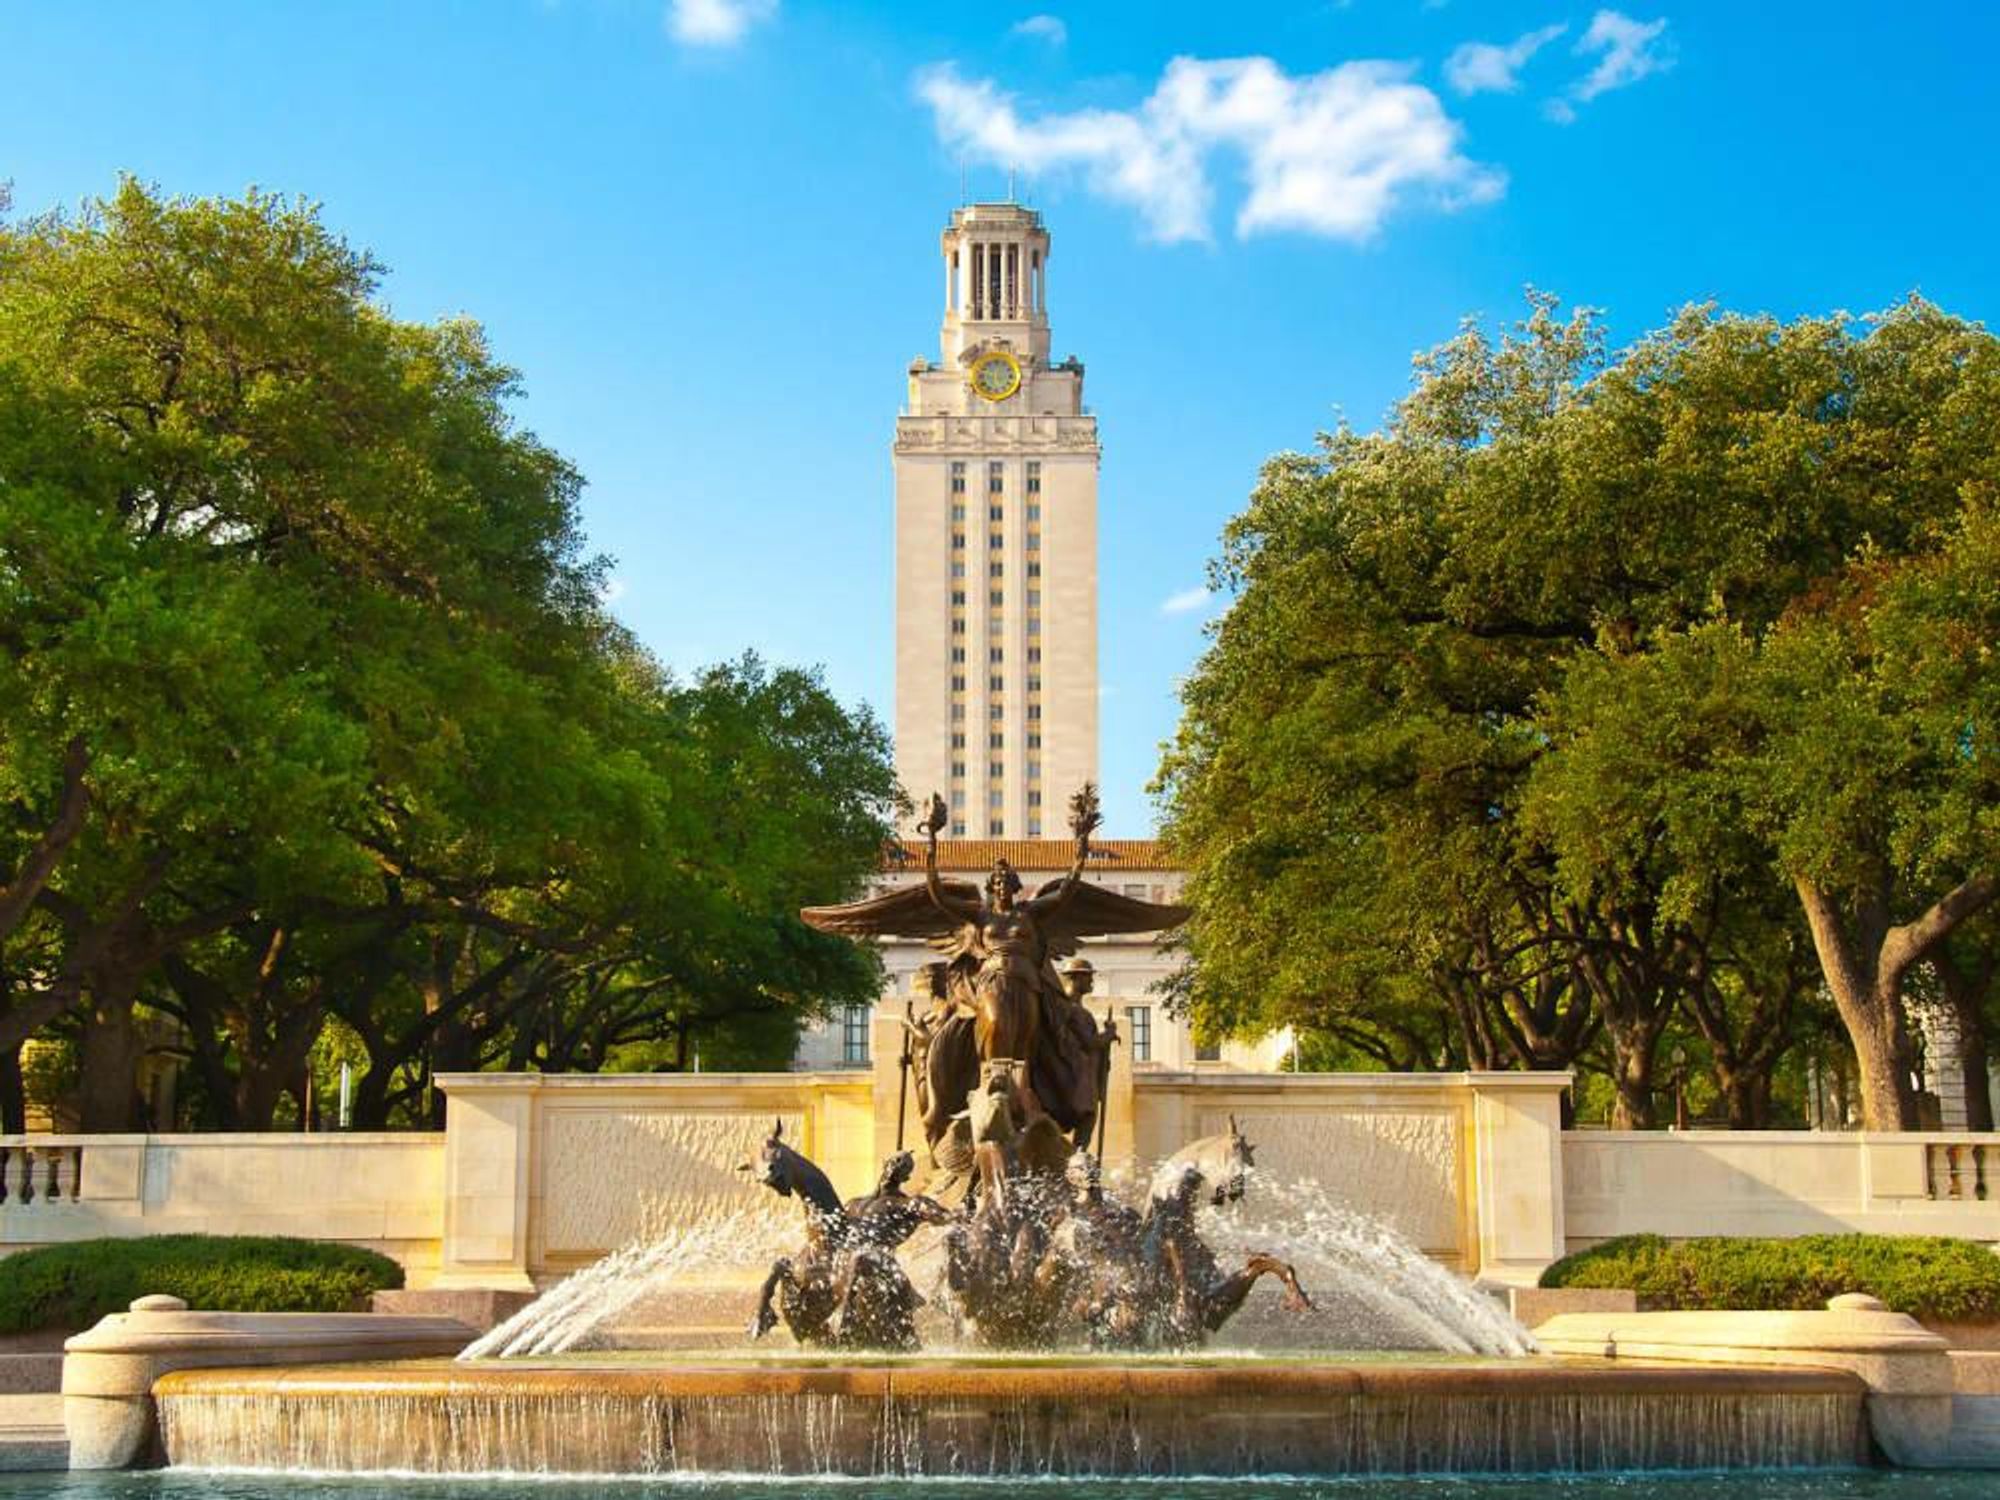 University of Texas UT tower and fountain